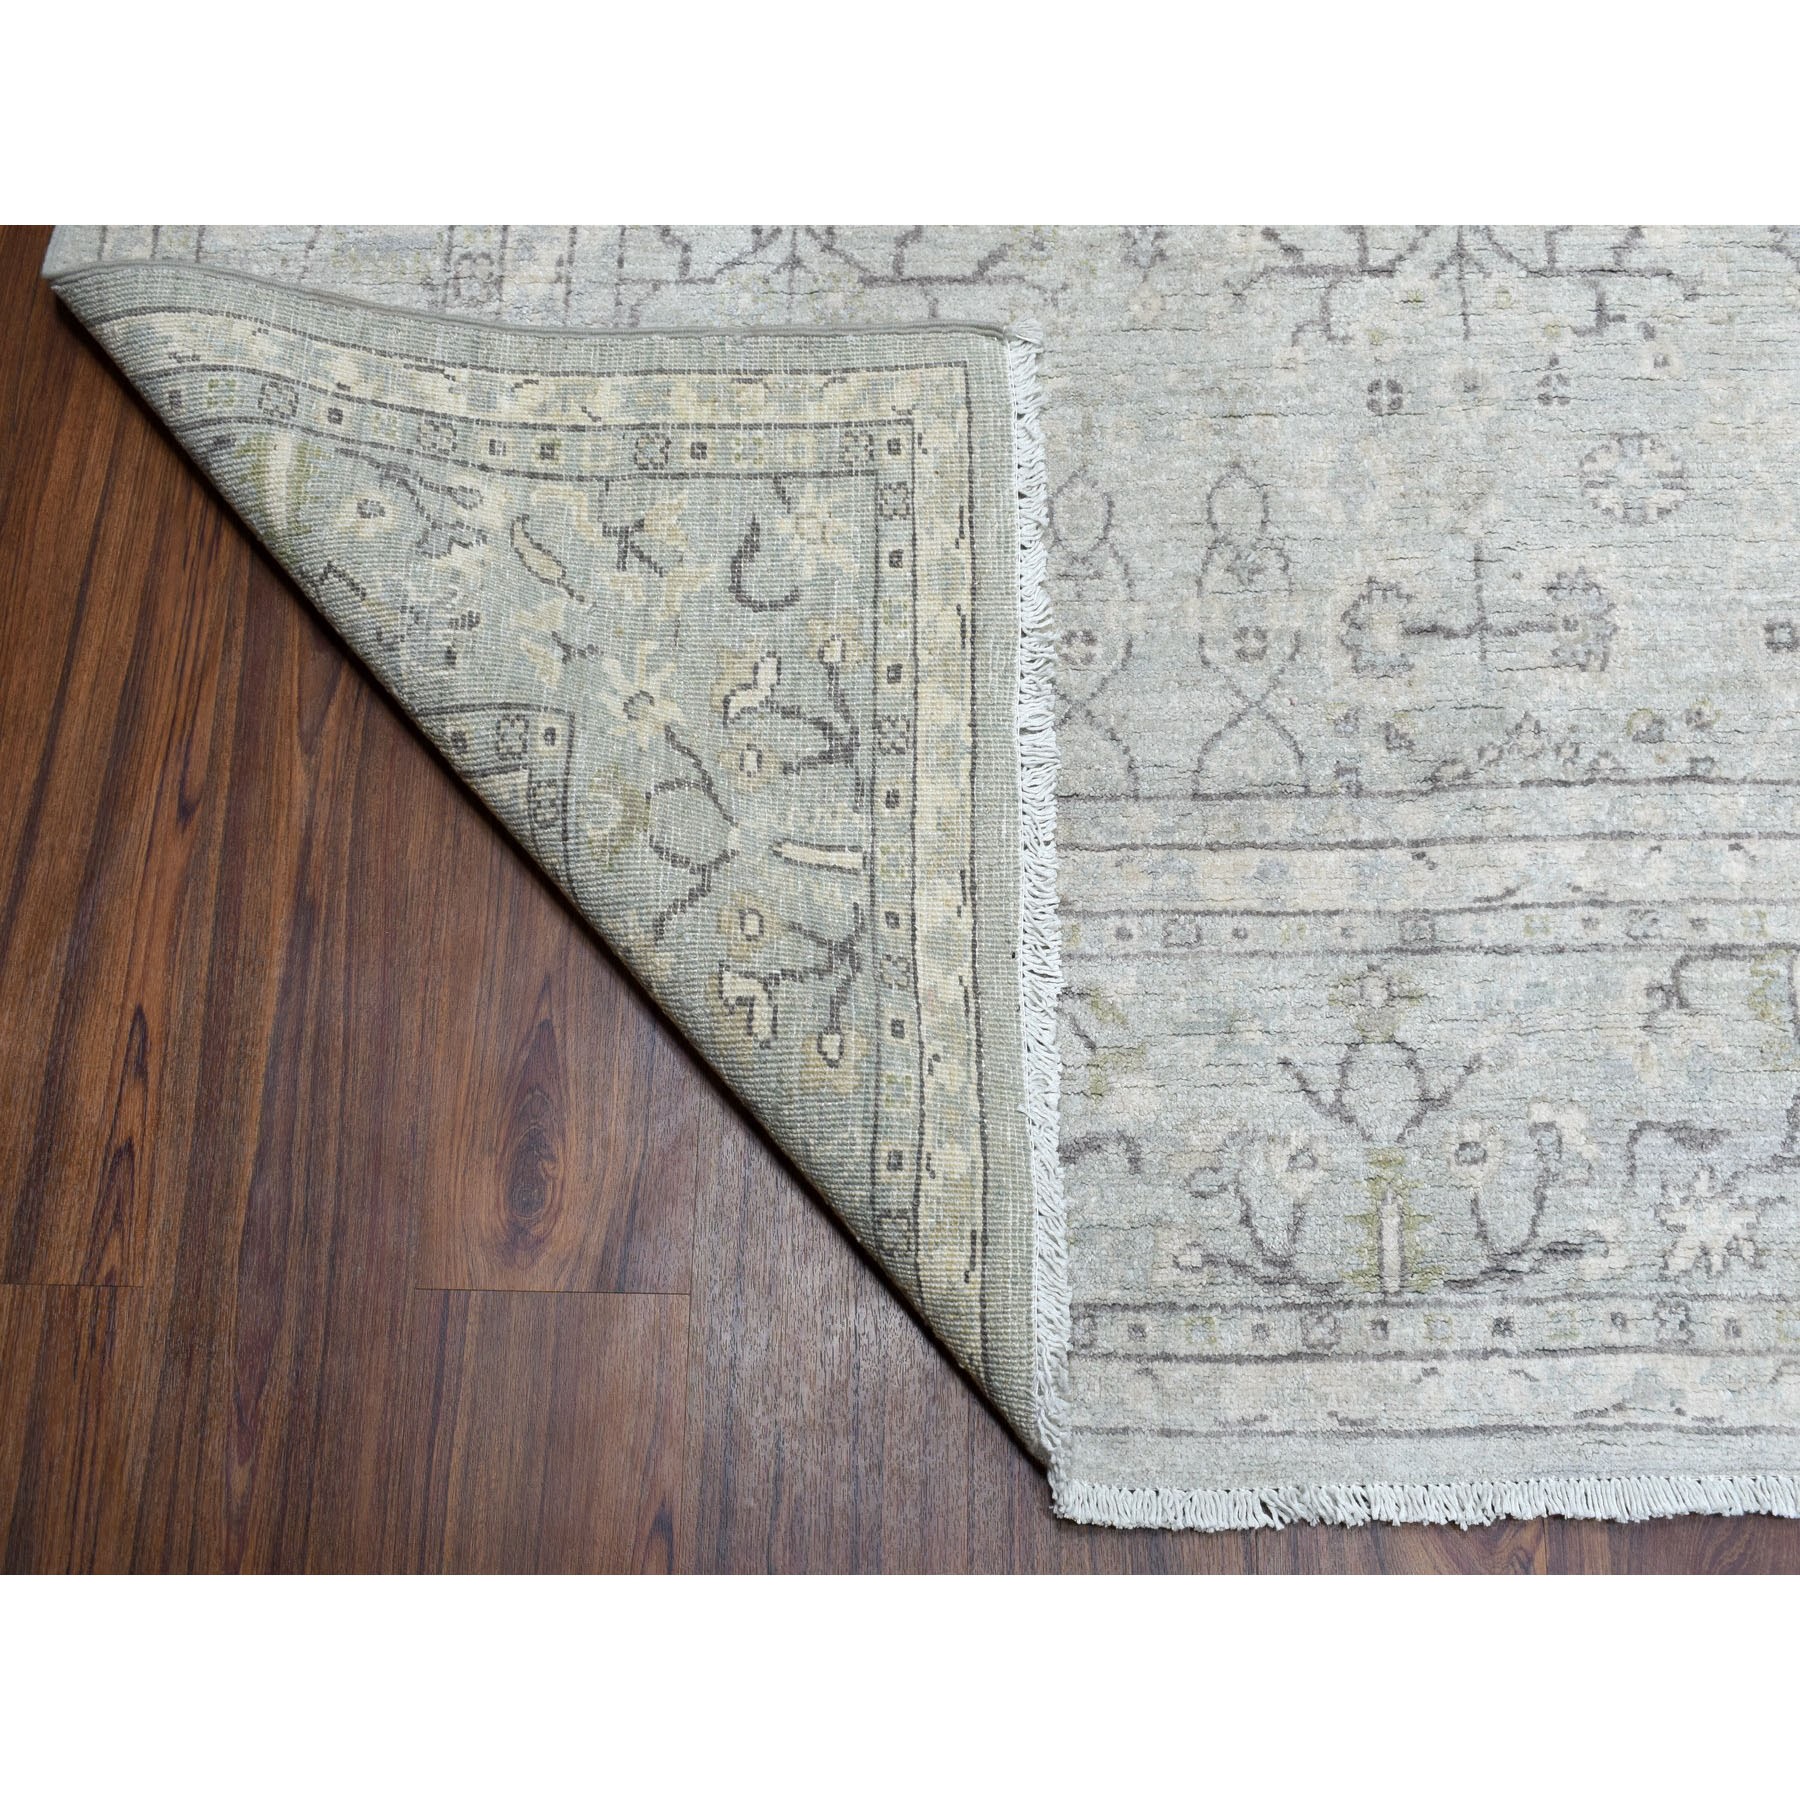 8-9 x11-2  White Wash Peshawar Pure Wool Hand Knotted Oriental Rug 